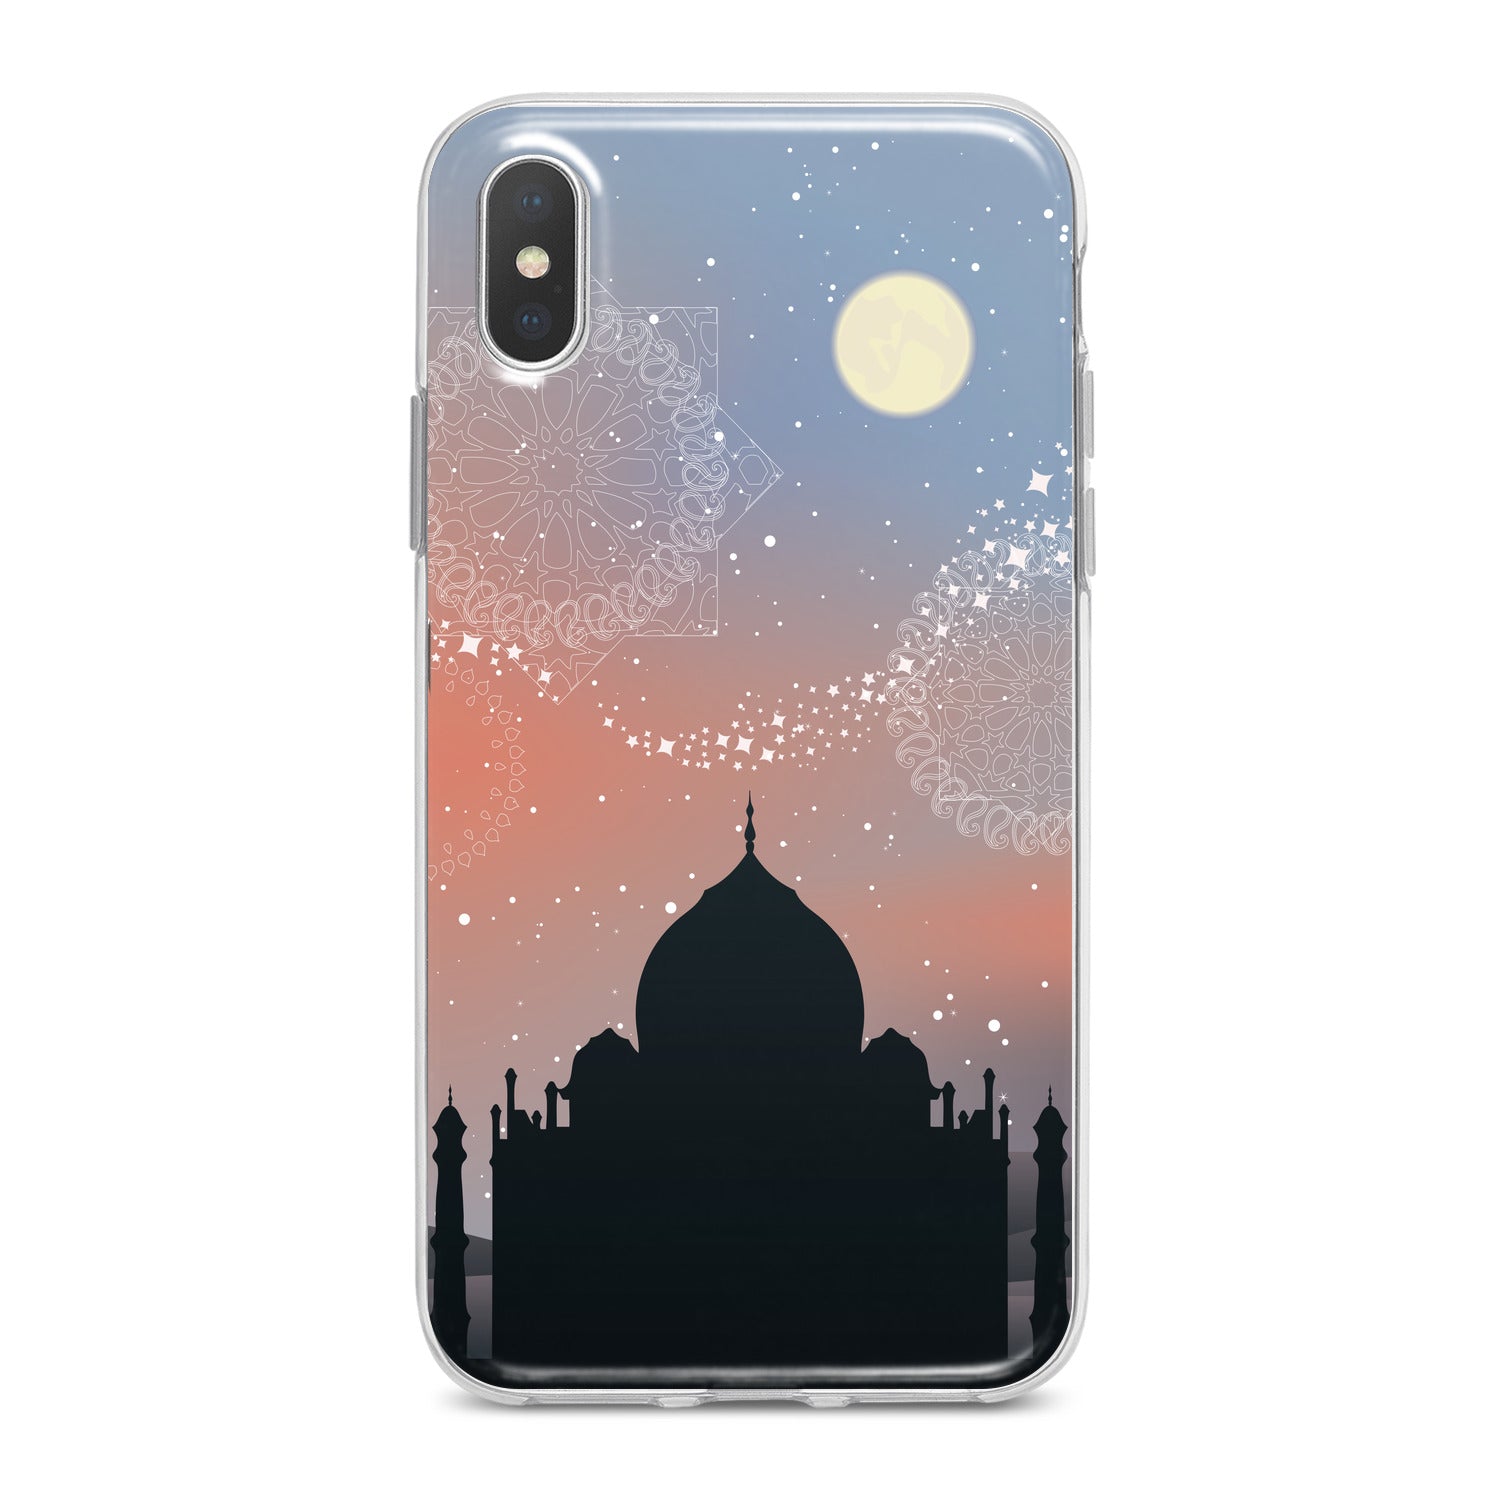 Lex Altern Taj Mahal View Phone Case for your iPhone & Android phone.